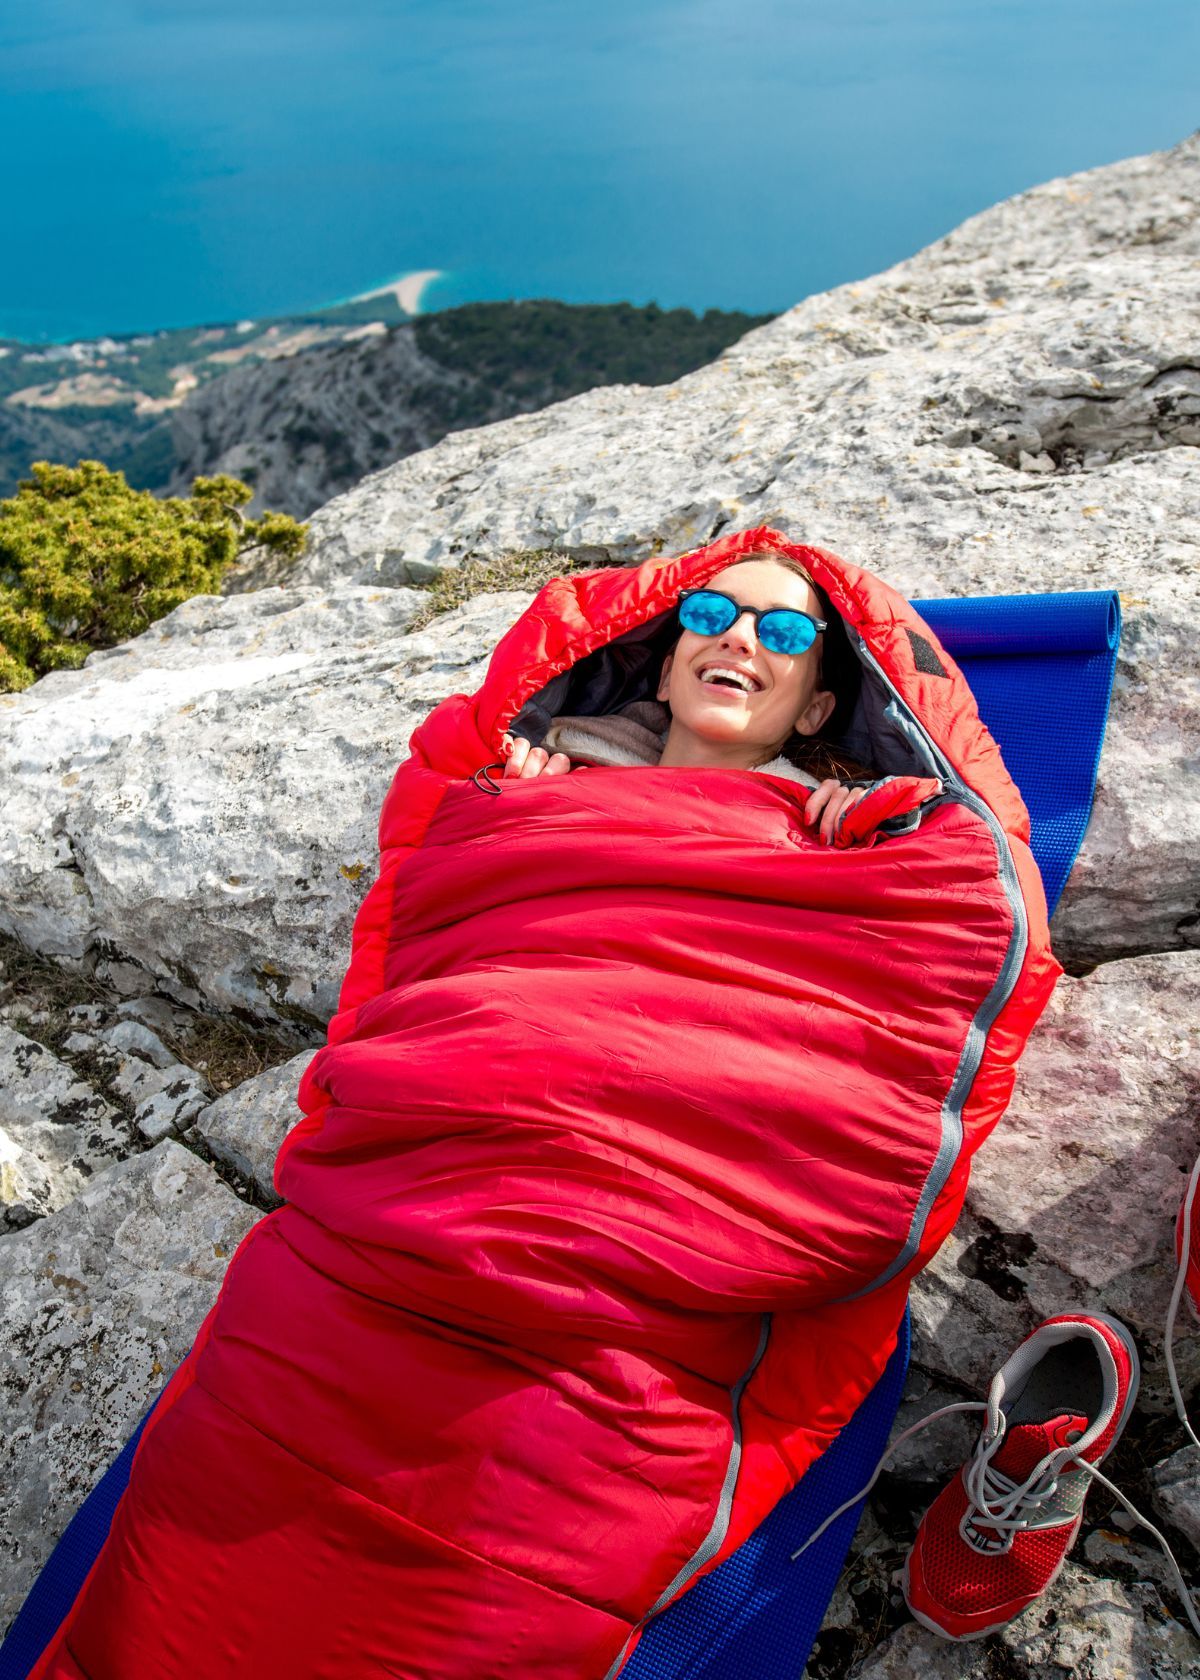 Master the Art of Folding: A Guide to Packing Your Mummy Sleeping Bag